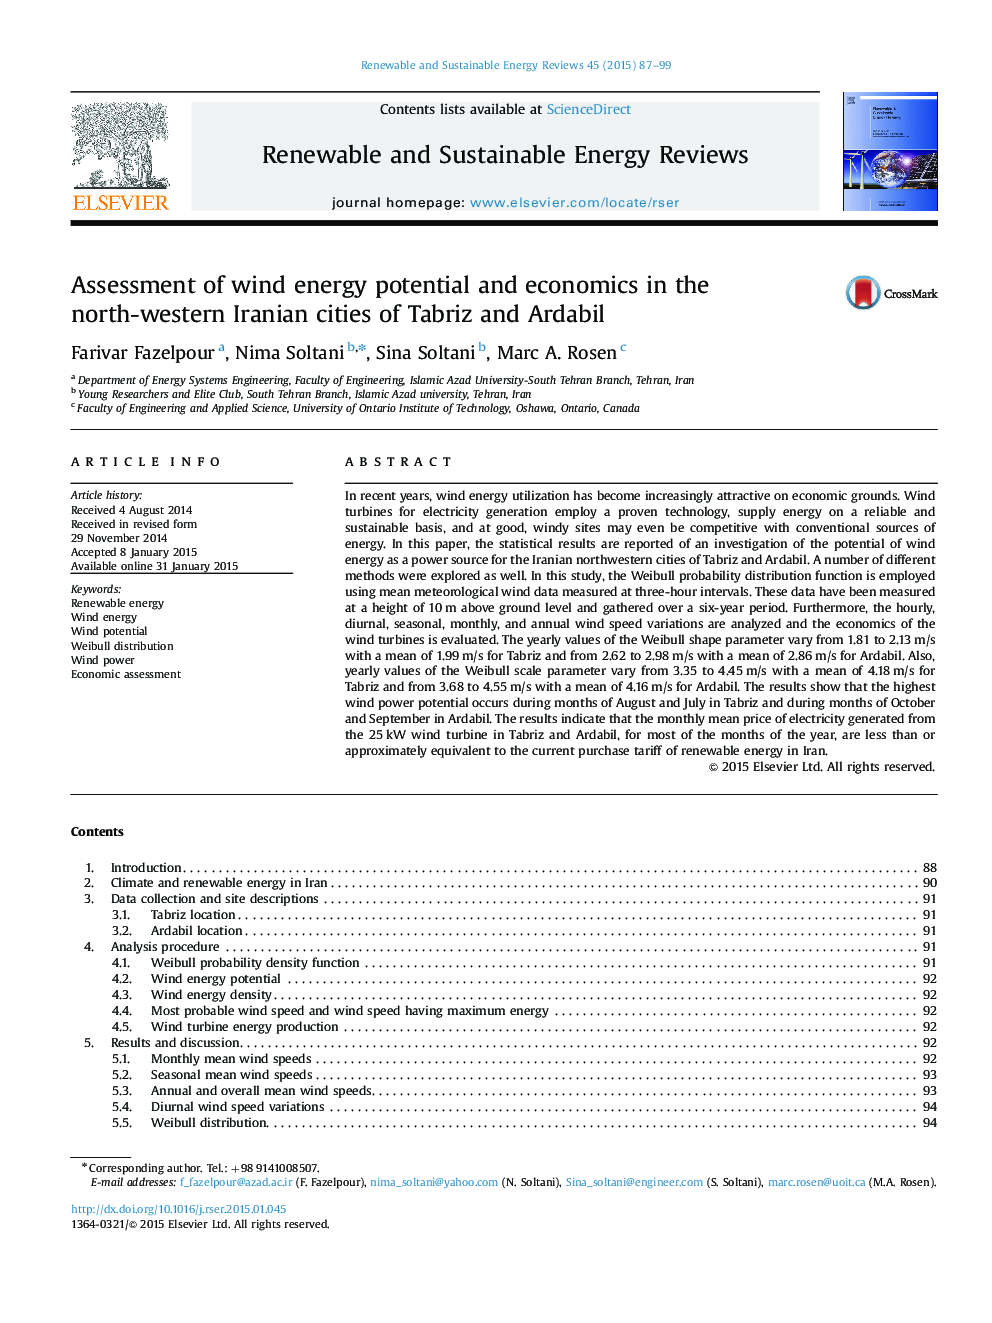 Assessment of wind energy potential and economics in the north-western Iranian cities of Tabriz and Ardabil